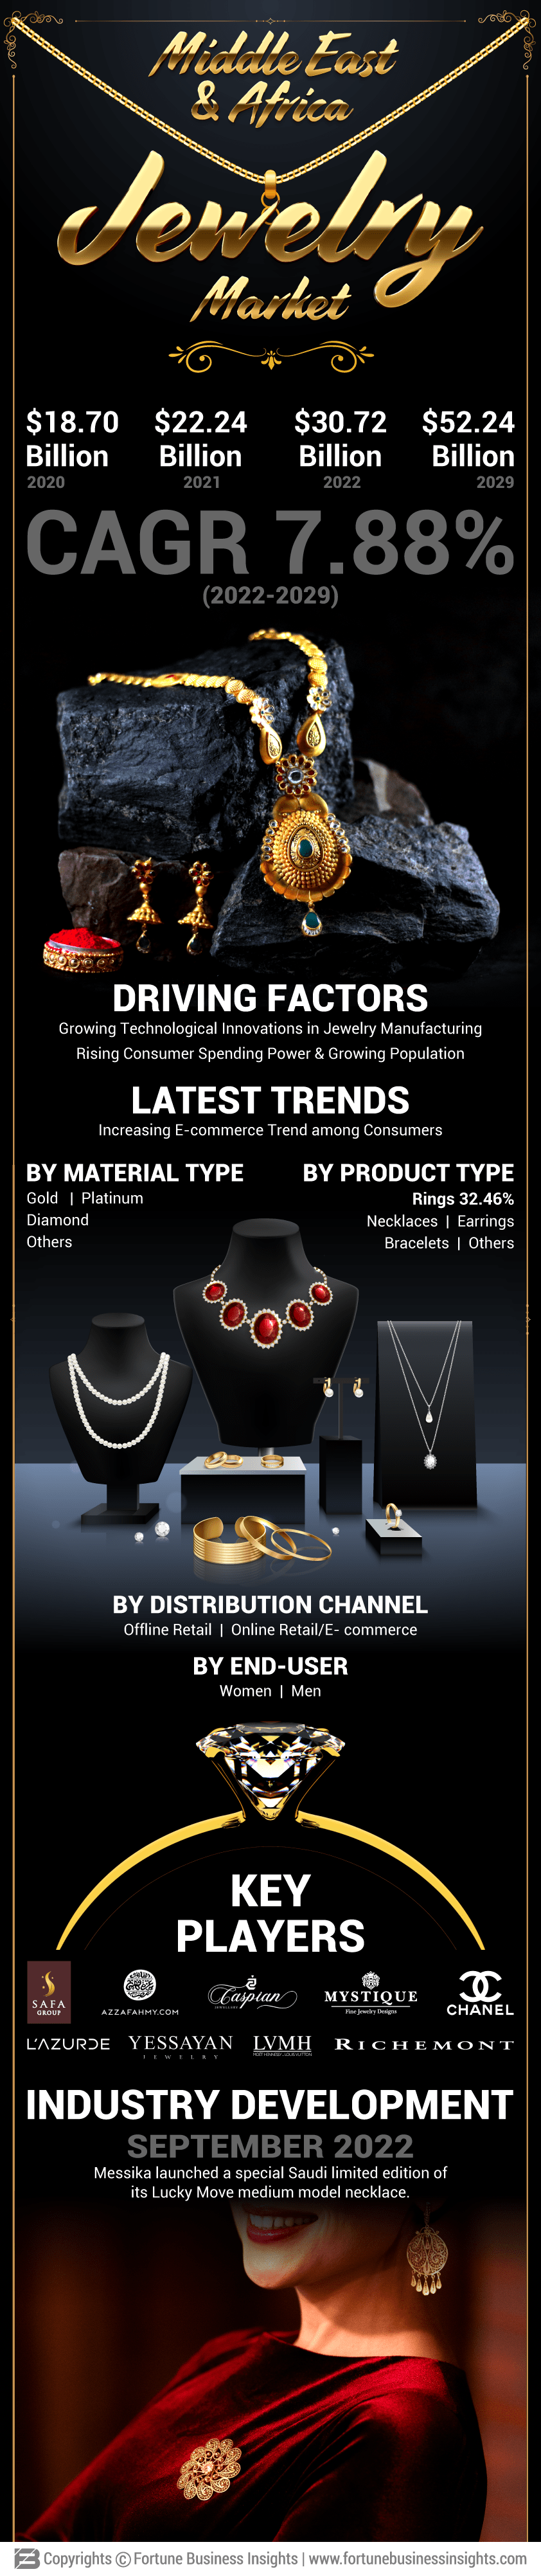 Middle East & Africa Jewelry Market